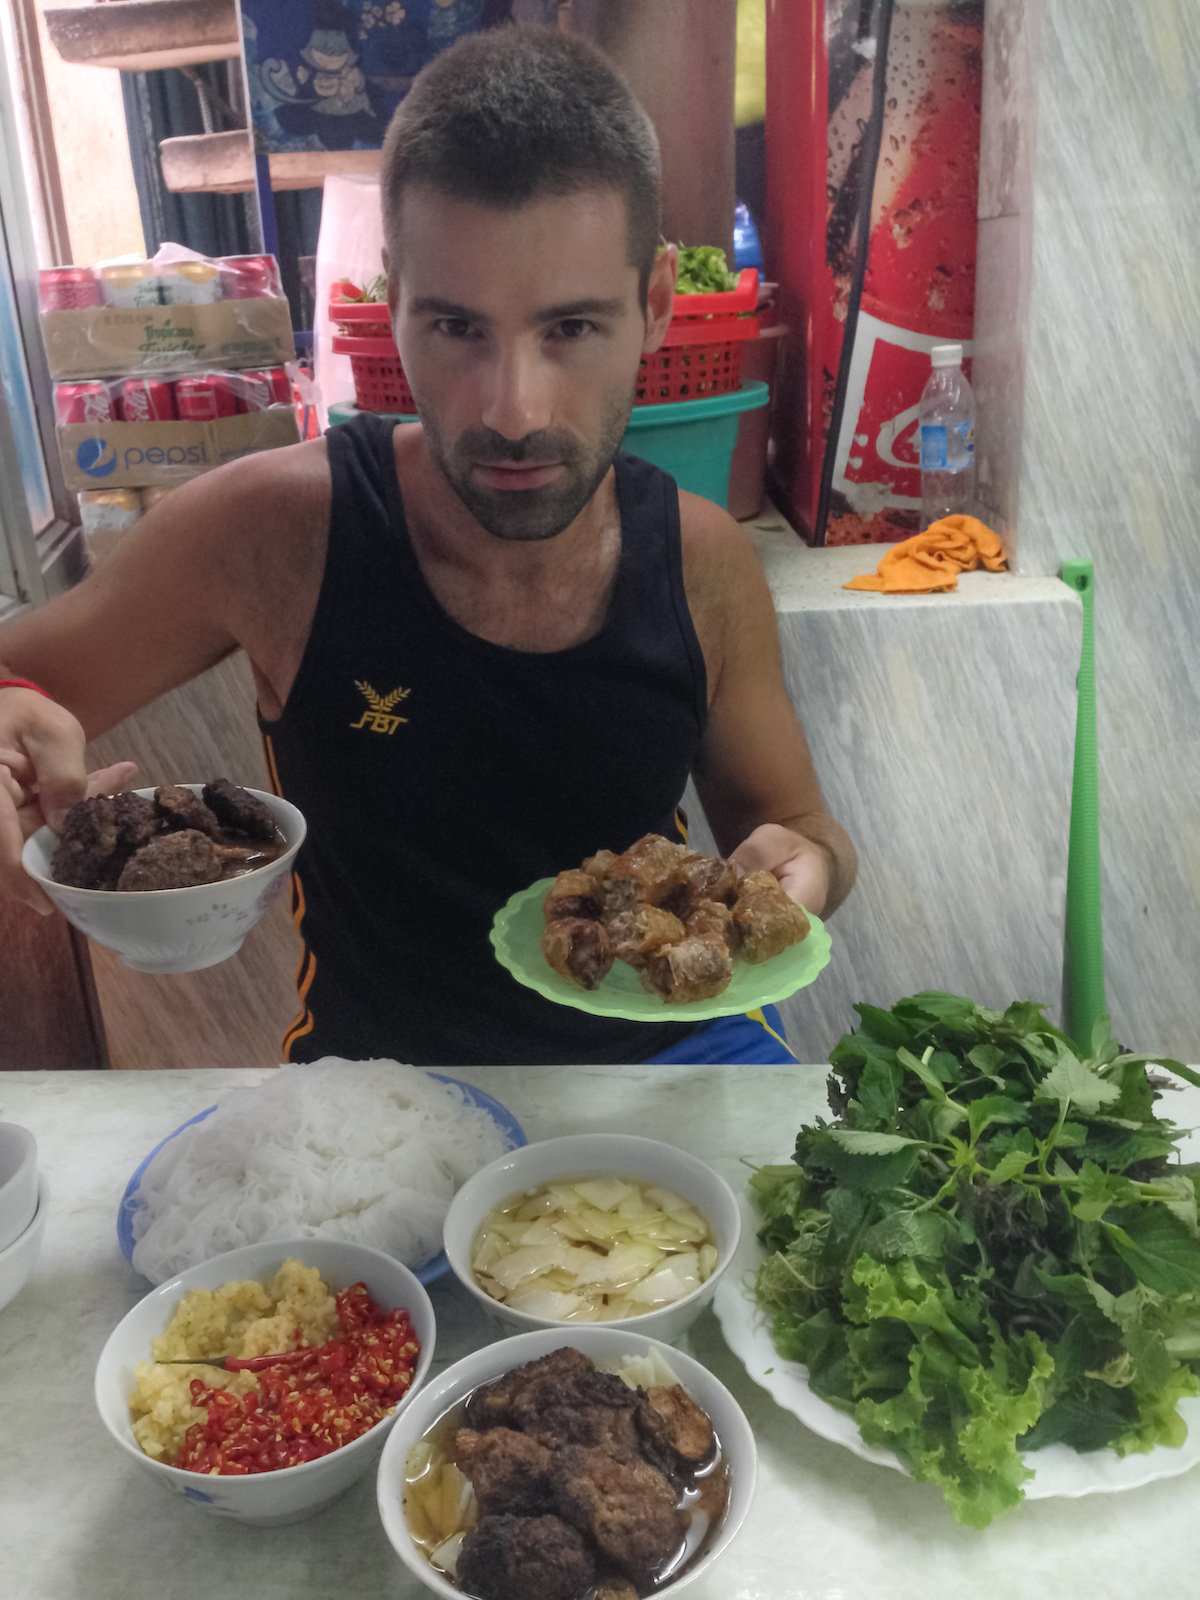 Bun cha is a fun dish from Vietnam where you assemble all the ingredients yourself